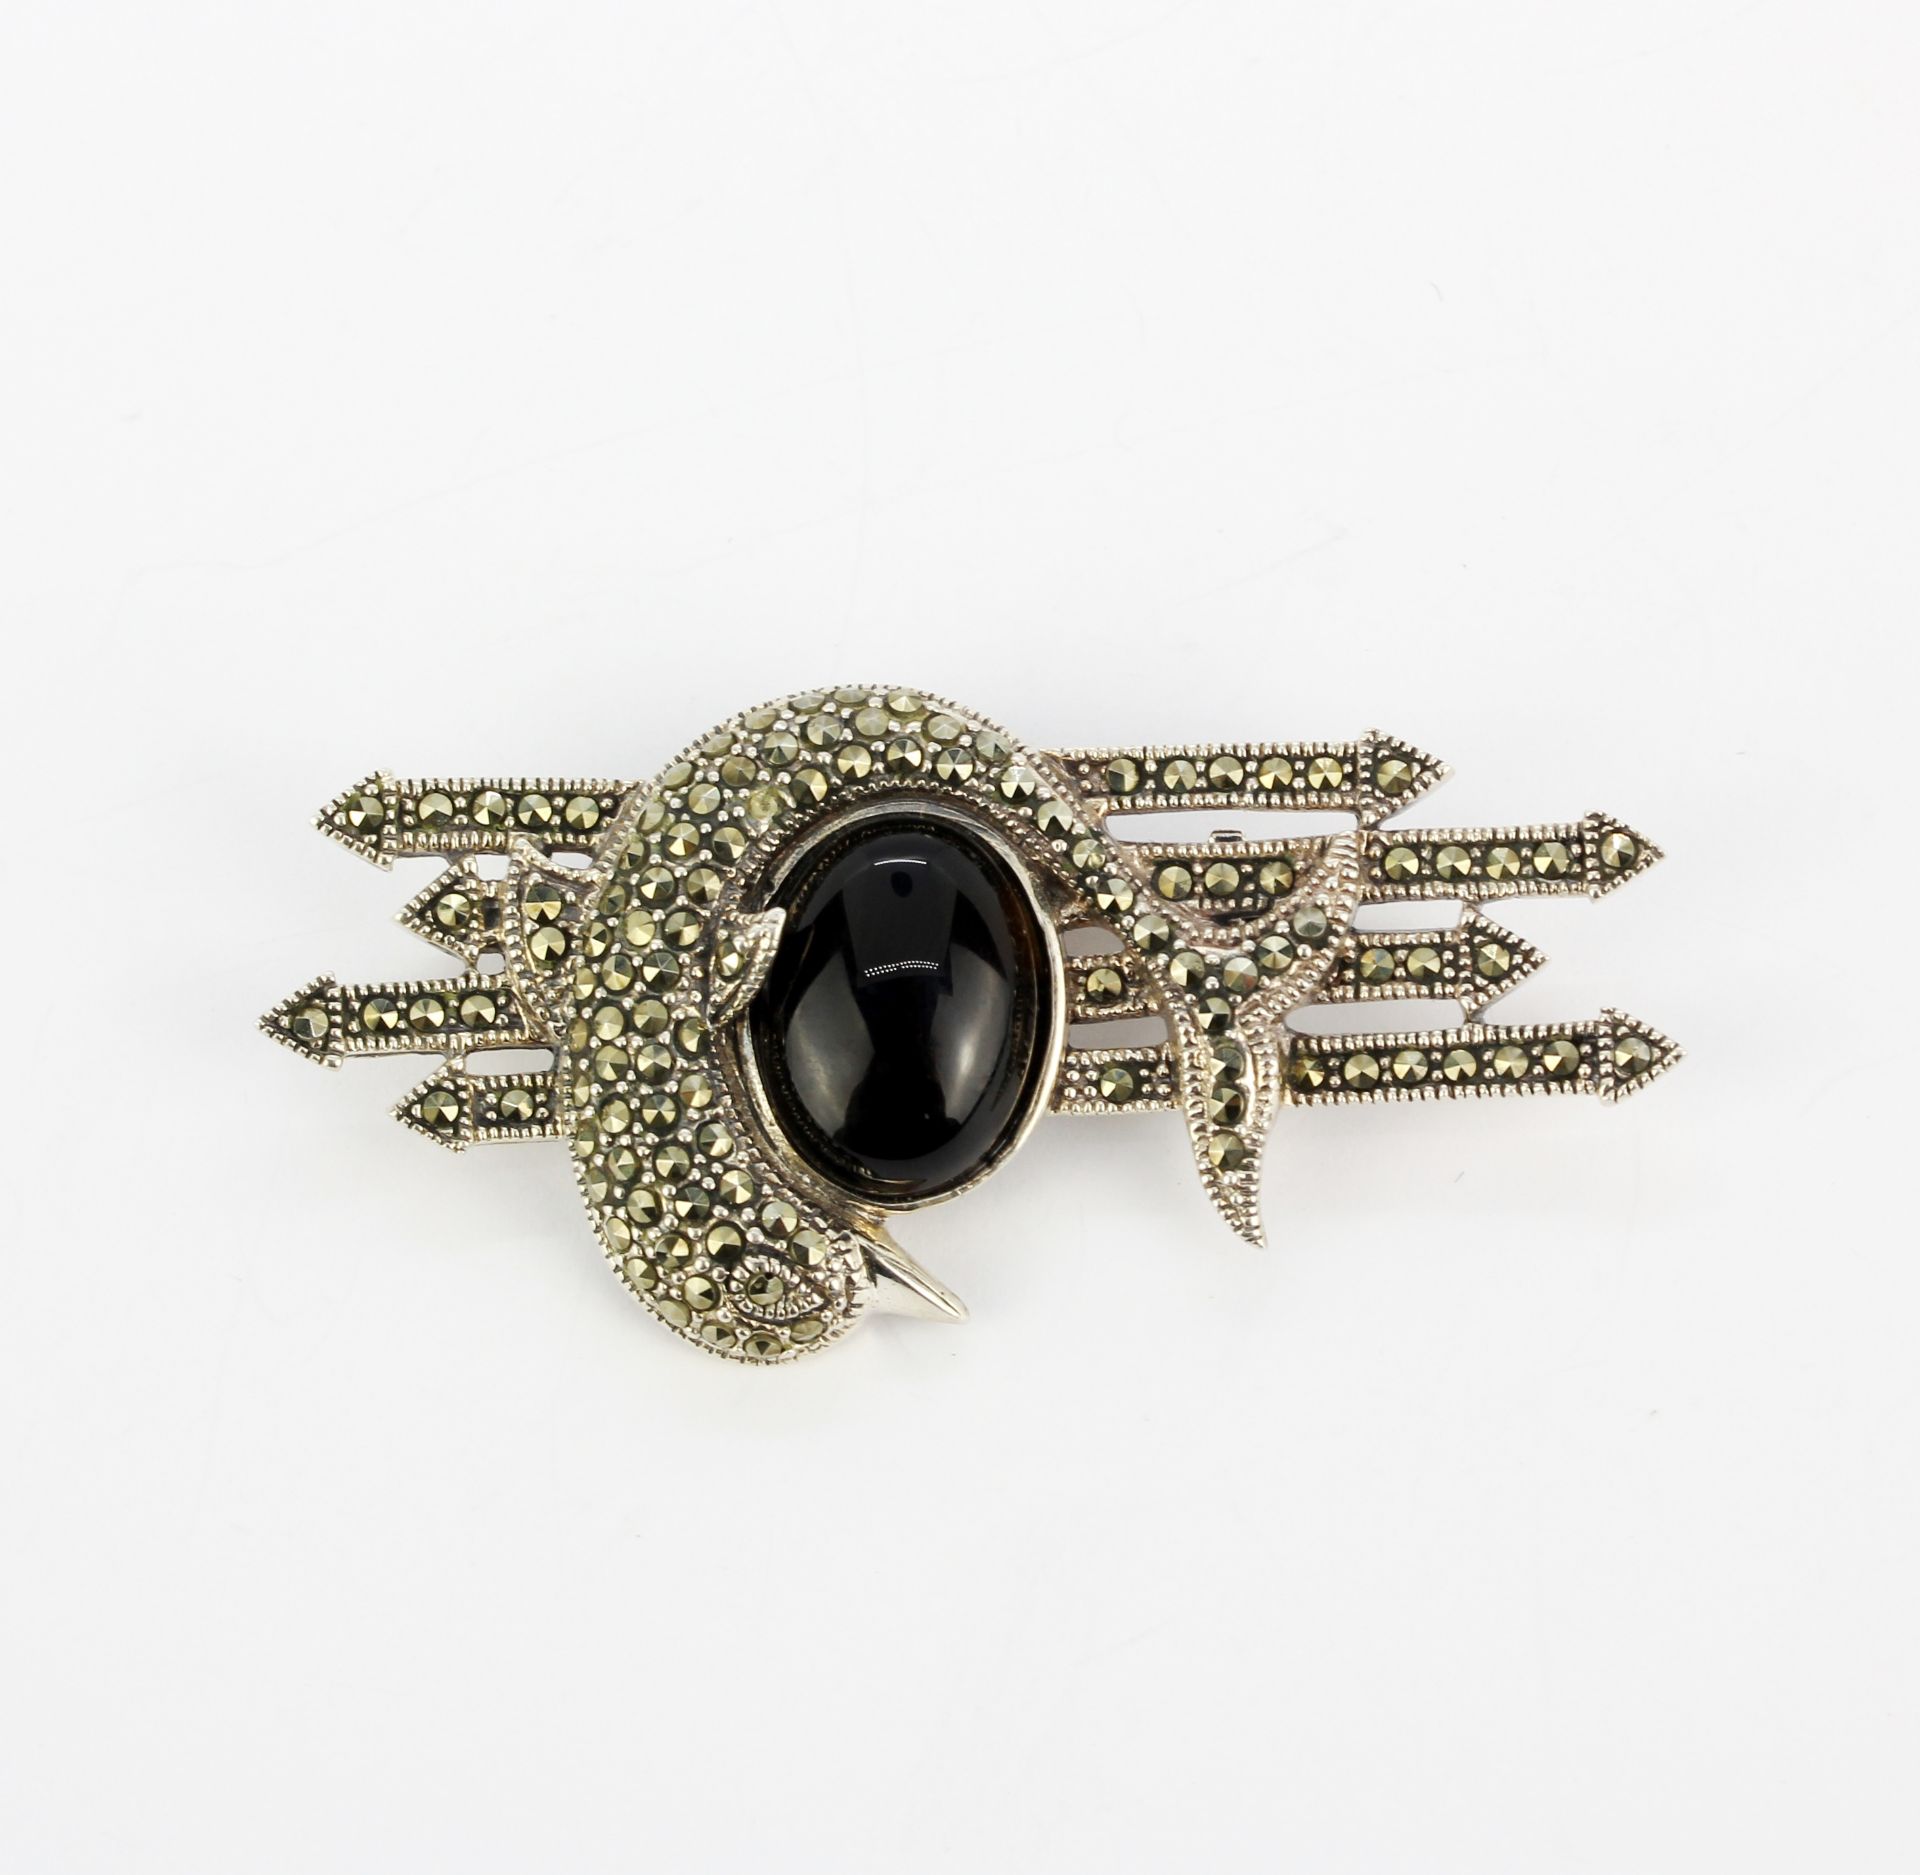 A large 925 silver dolphin brooch set with marcasite and an oval cabochon tourmaline, L. 6cm. - Image 2 of 3